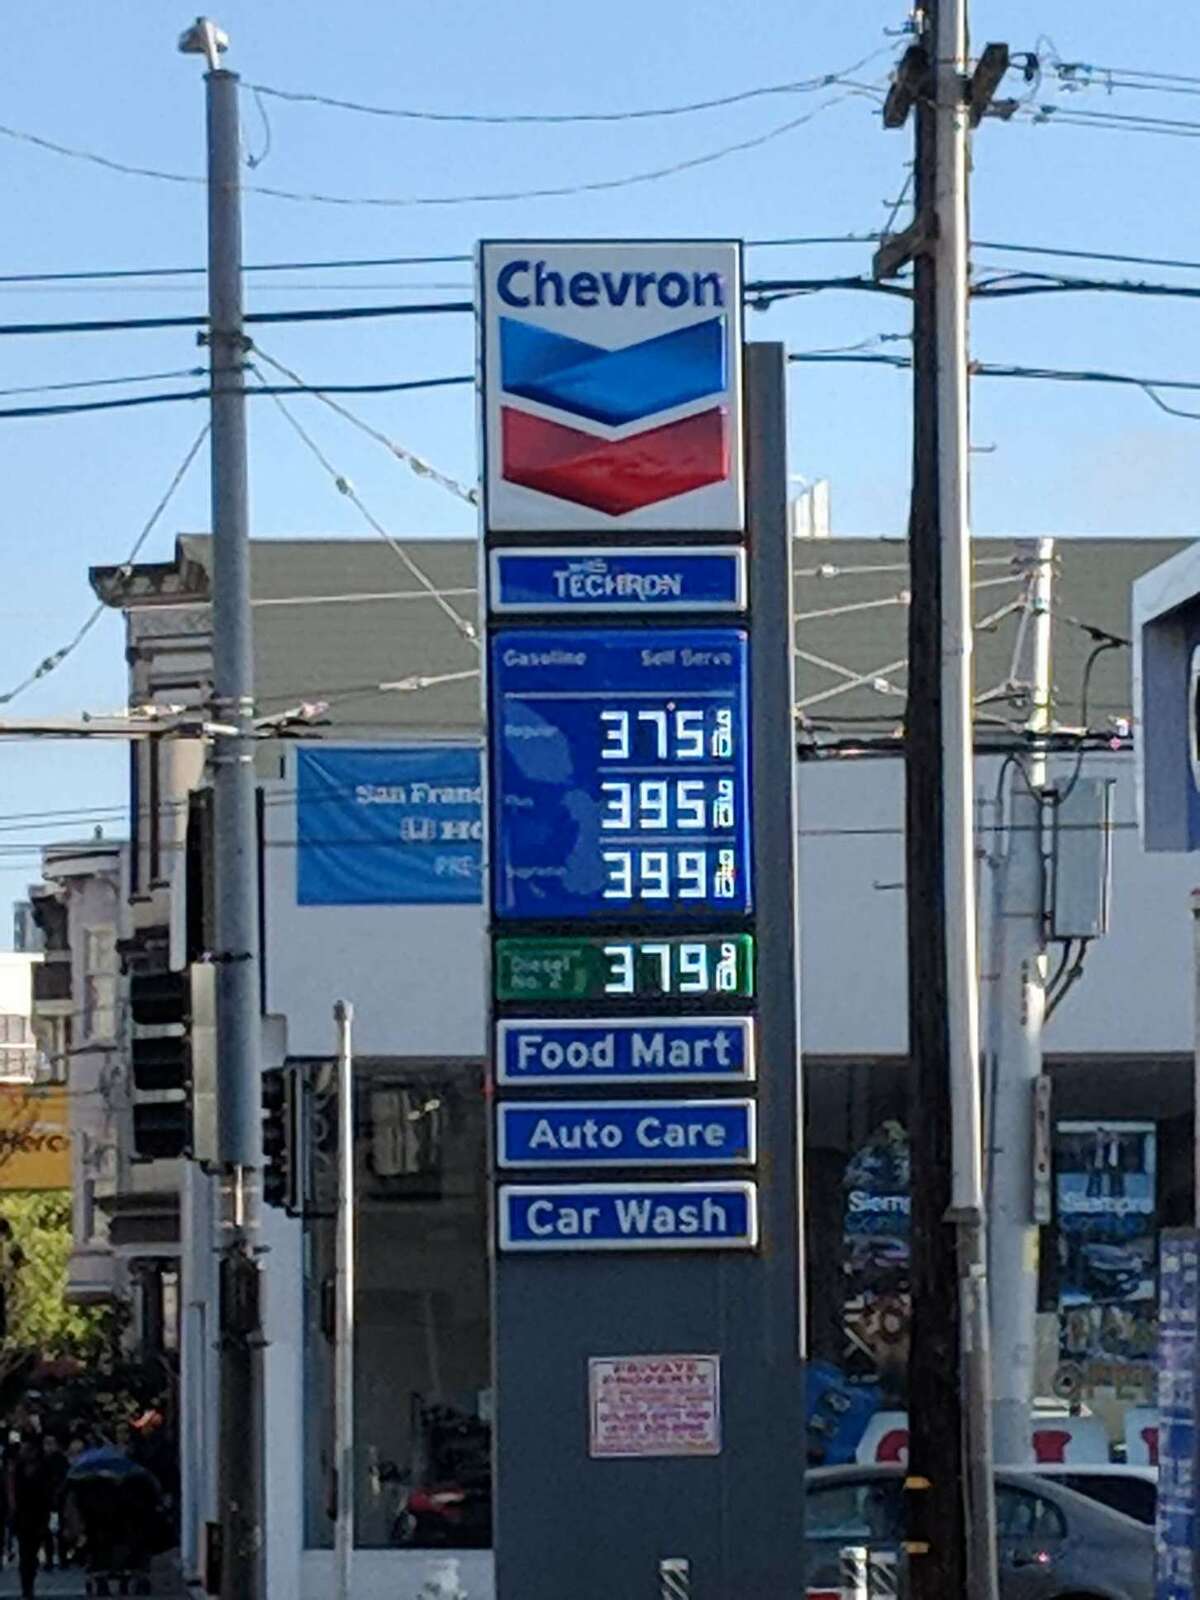 Gas prices at Chevron on South Van Ness in San Francisco on May 2, 2018.